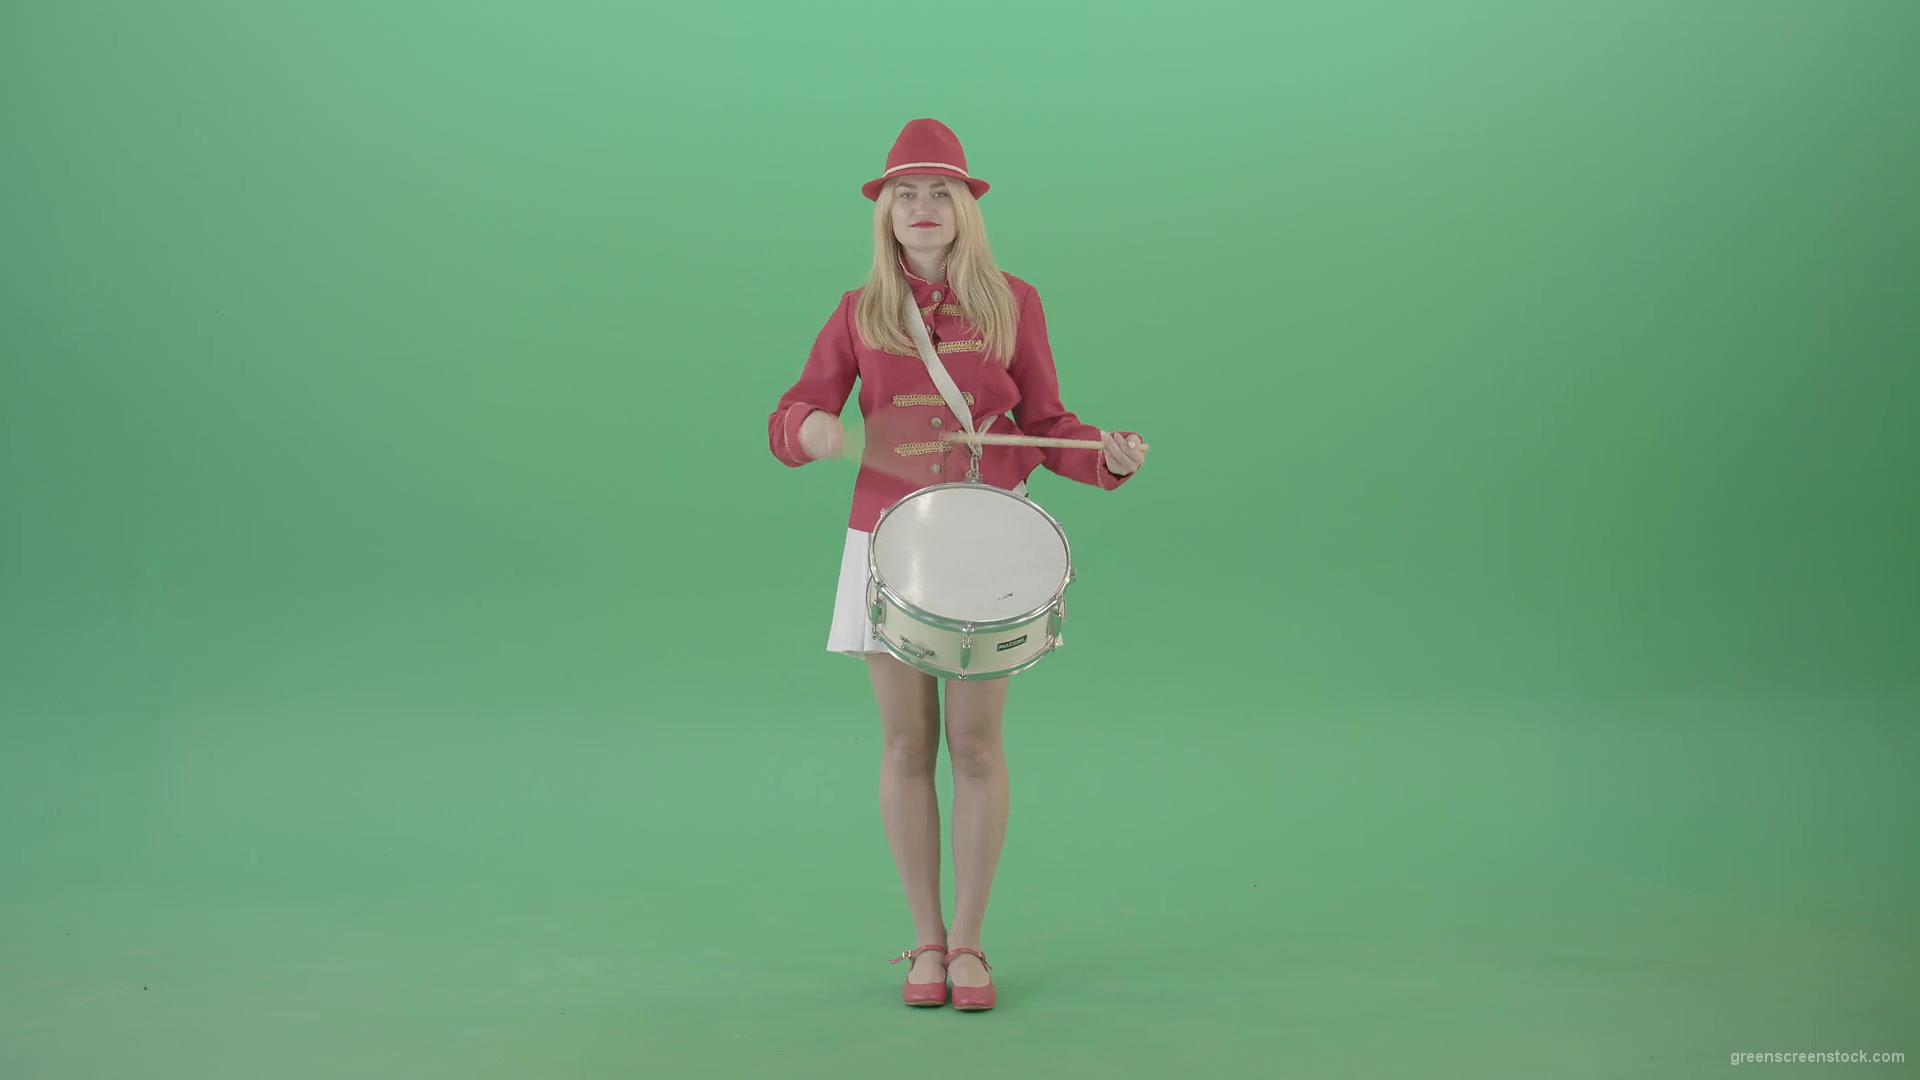 Girl-in-18-Century-military-uniform-play-snare-drum-isolated-on-green-screen-4K-Video-Footage-1920_005 Green Screen Stock